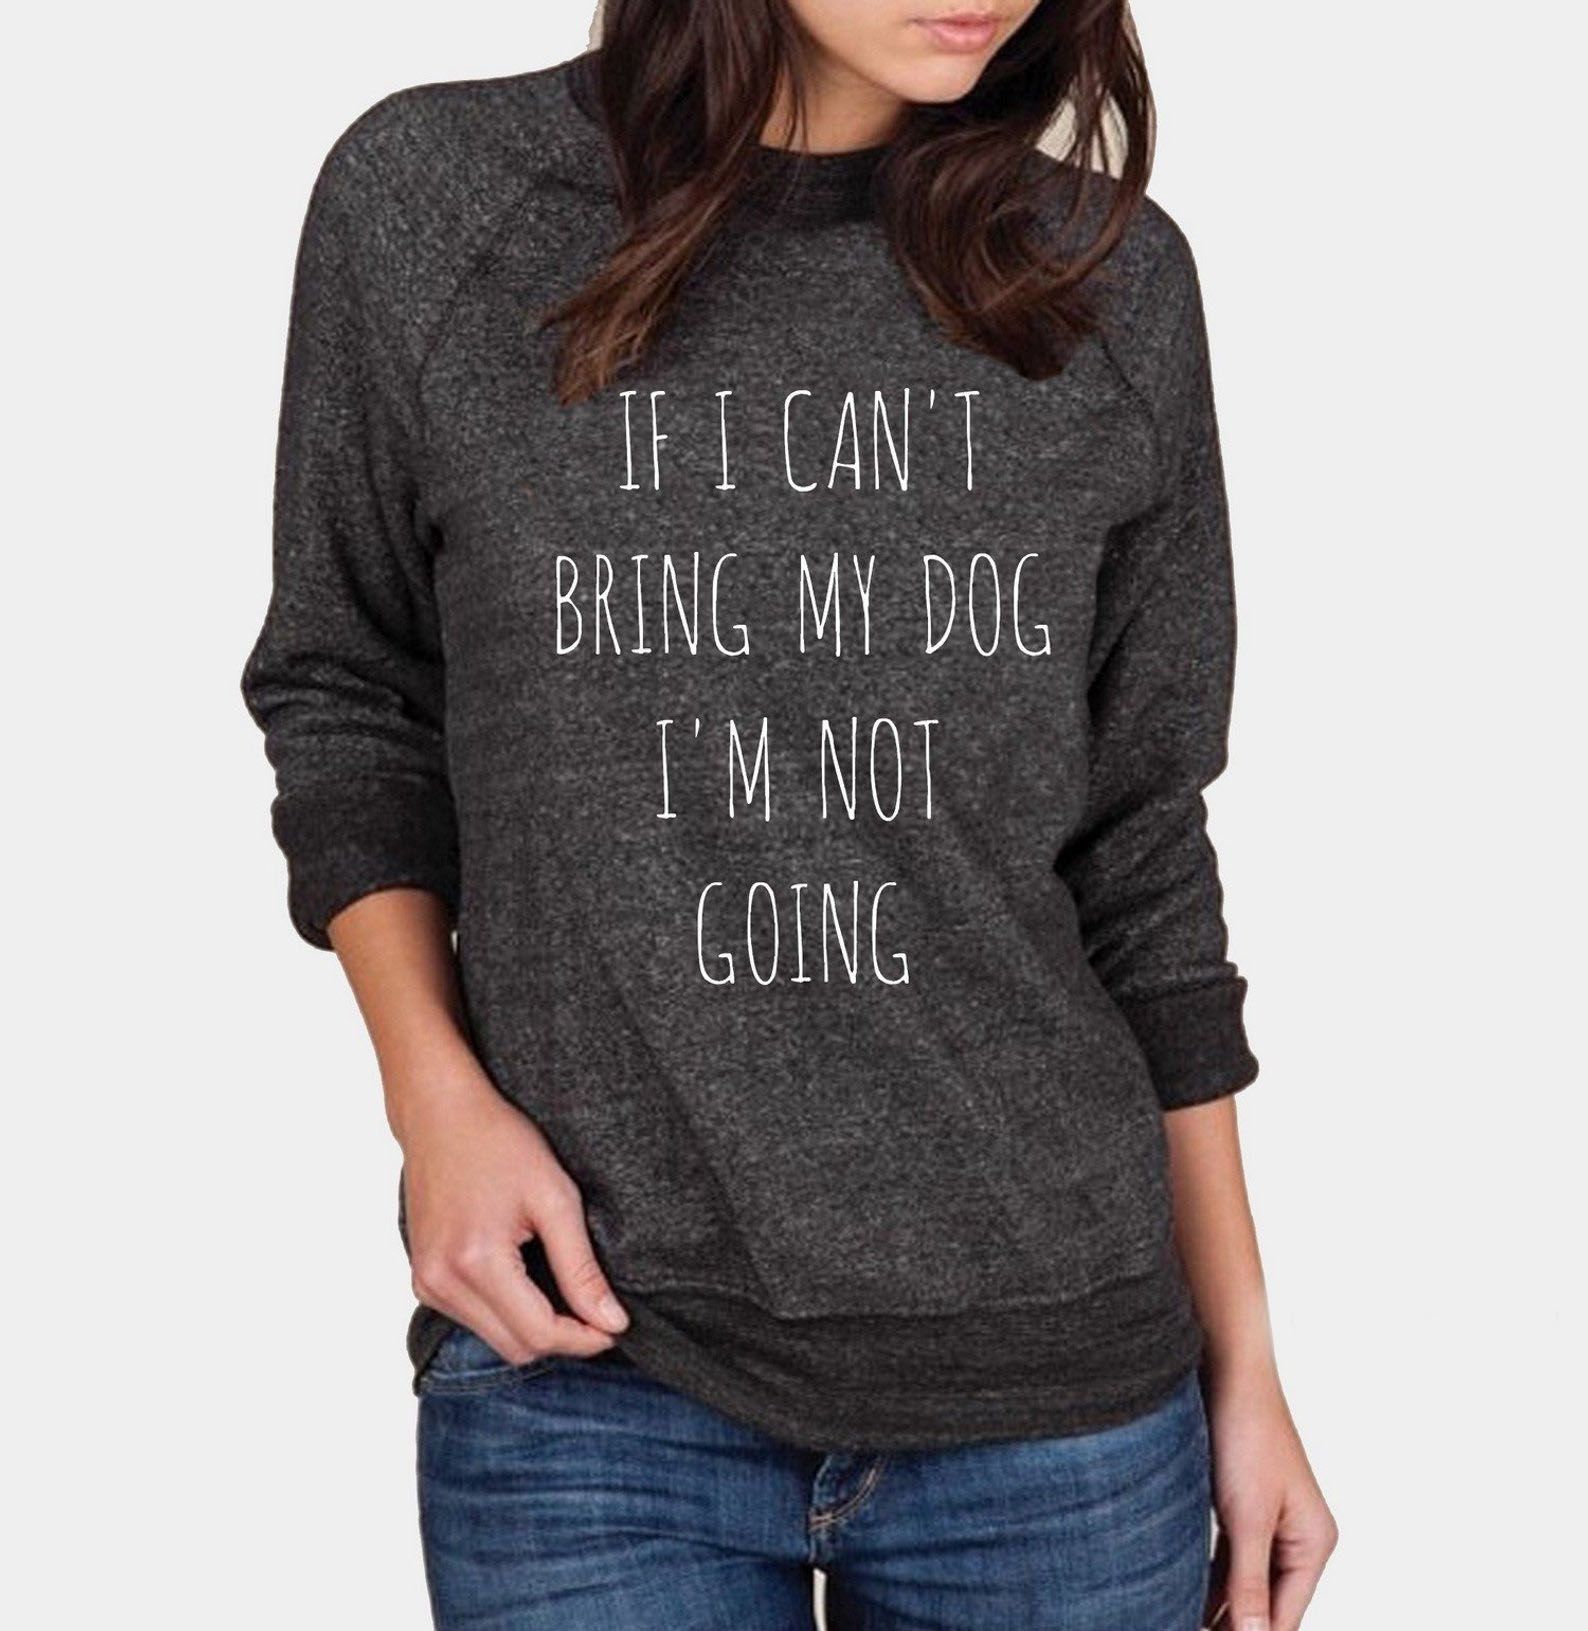 Dog Love Shirt Dog Love Shirt Mom Dog Shirt Mother\u2019s Day Gift Gift For Mom, Funny Mom Shirts Paws Heart Sweater Dog Mother